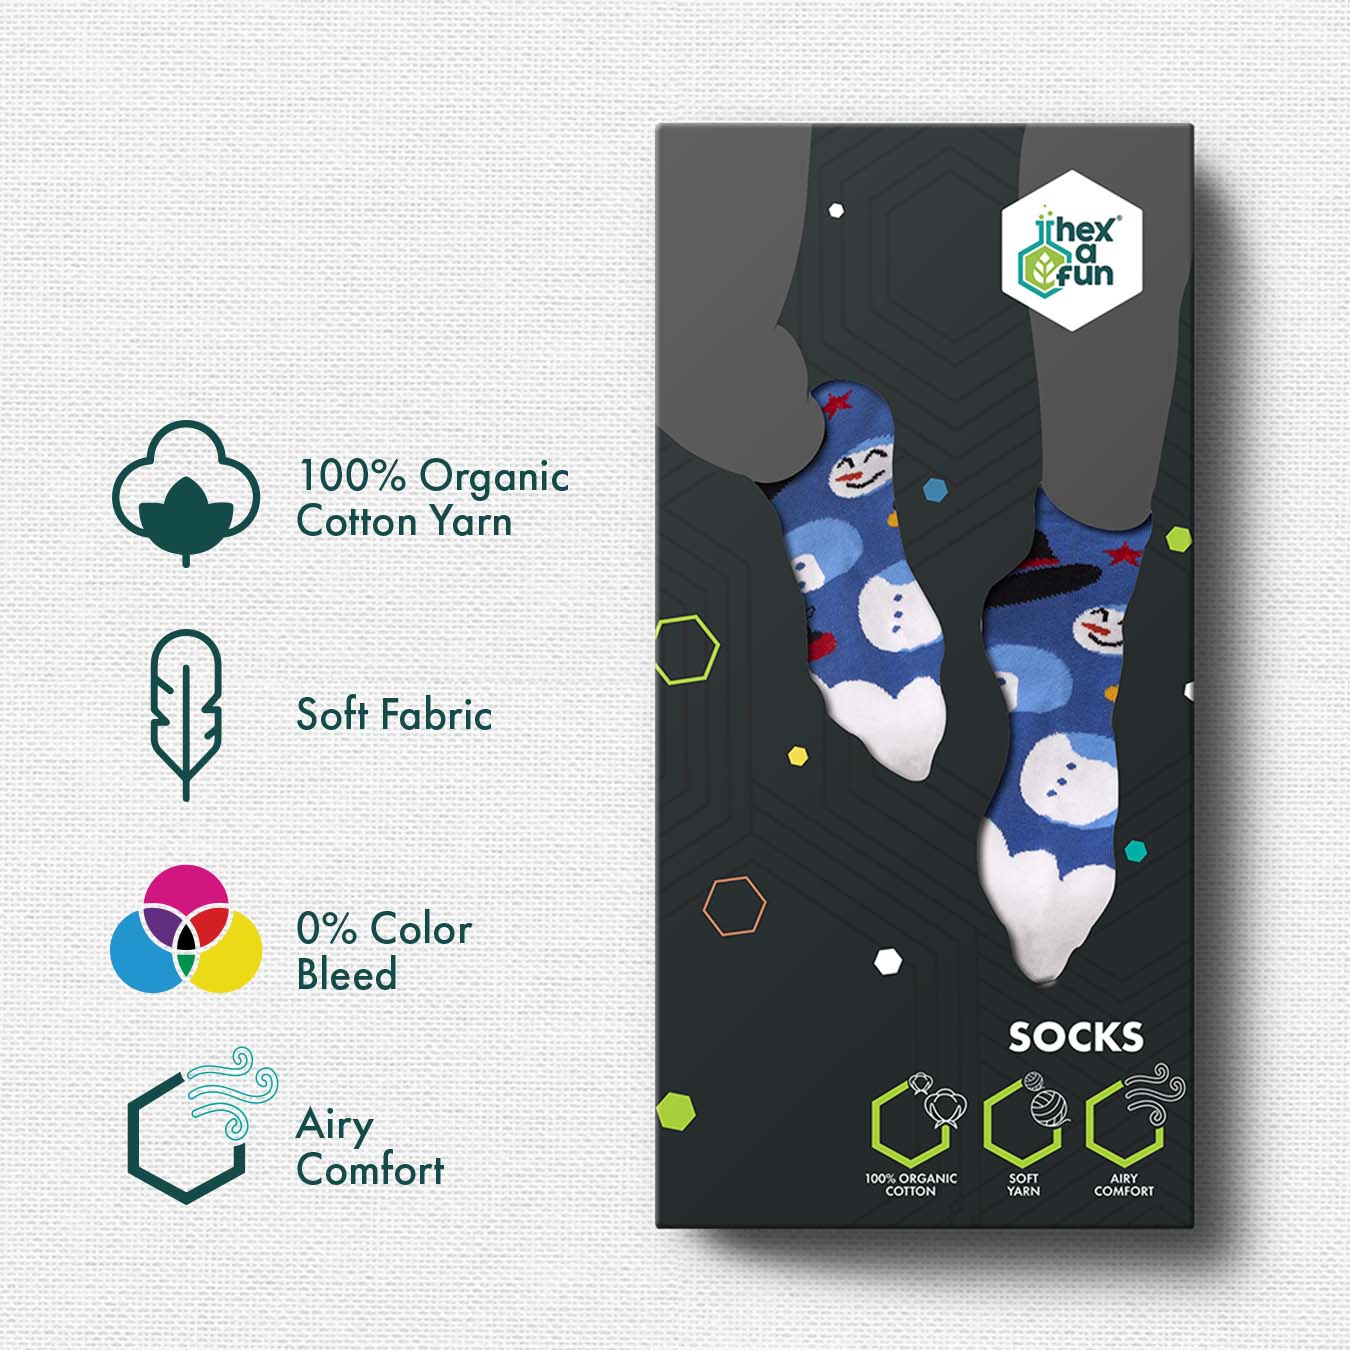 The Snow Squad! Unisex Socks, 100% Organic Cotton, Ankle Length, Pack of 1